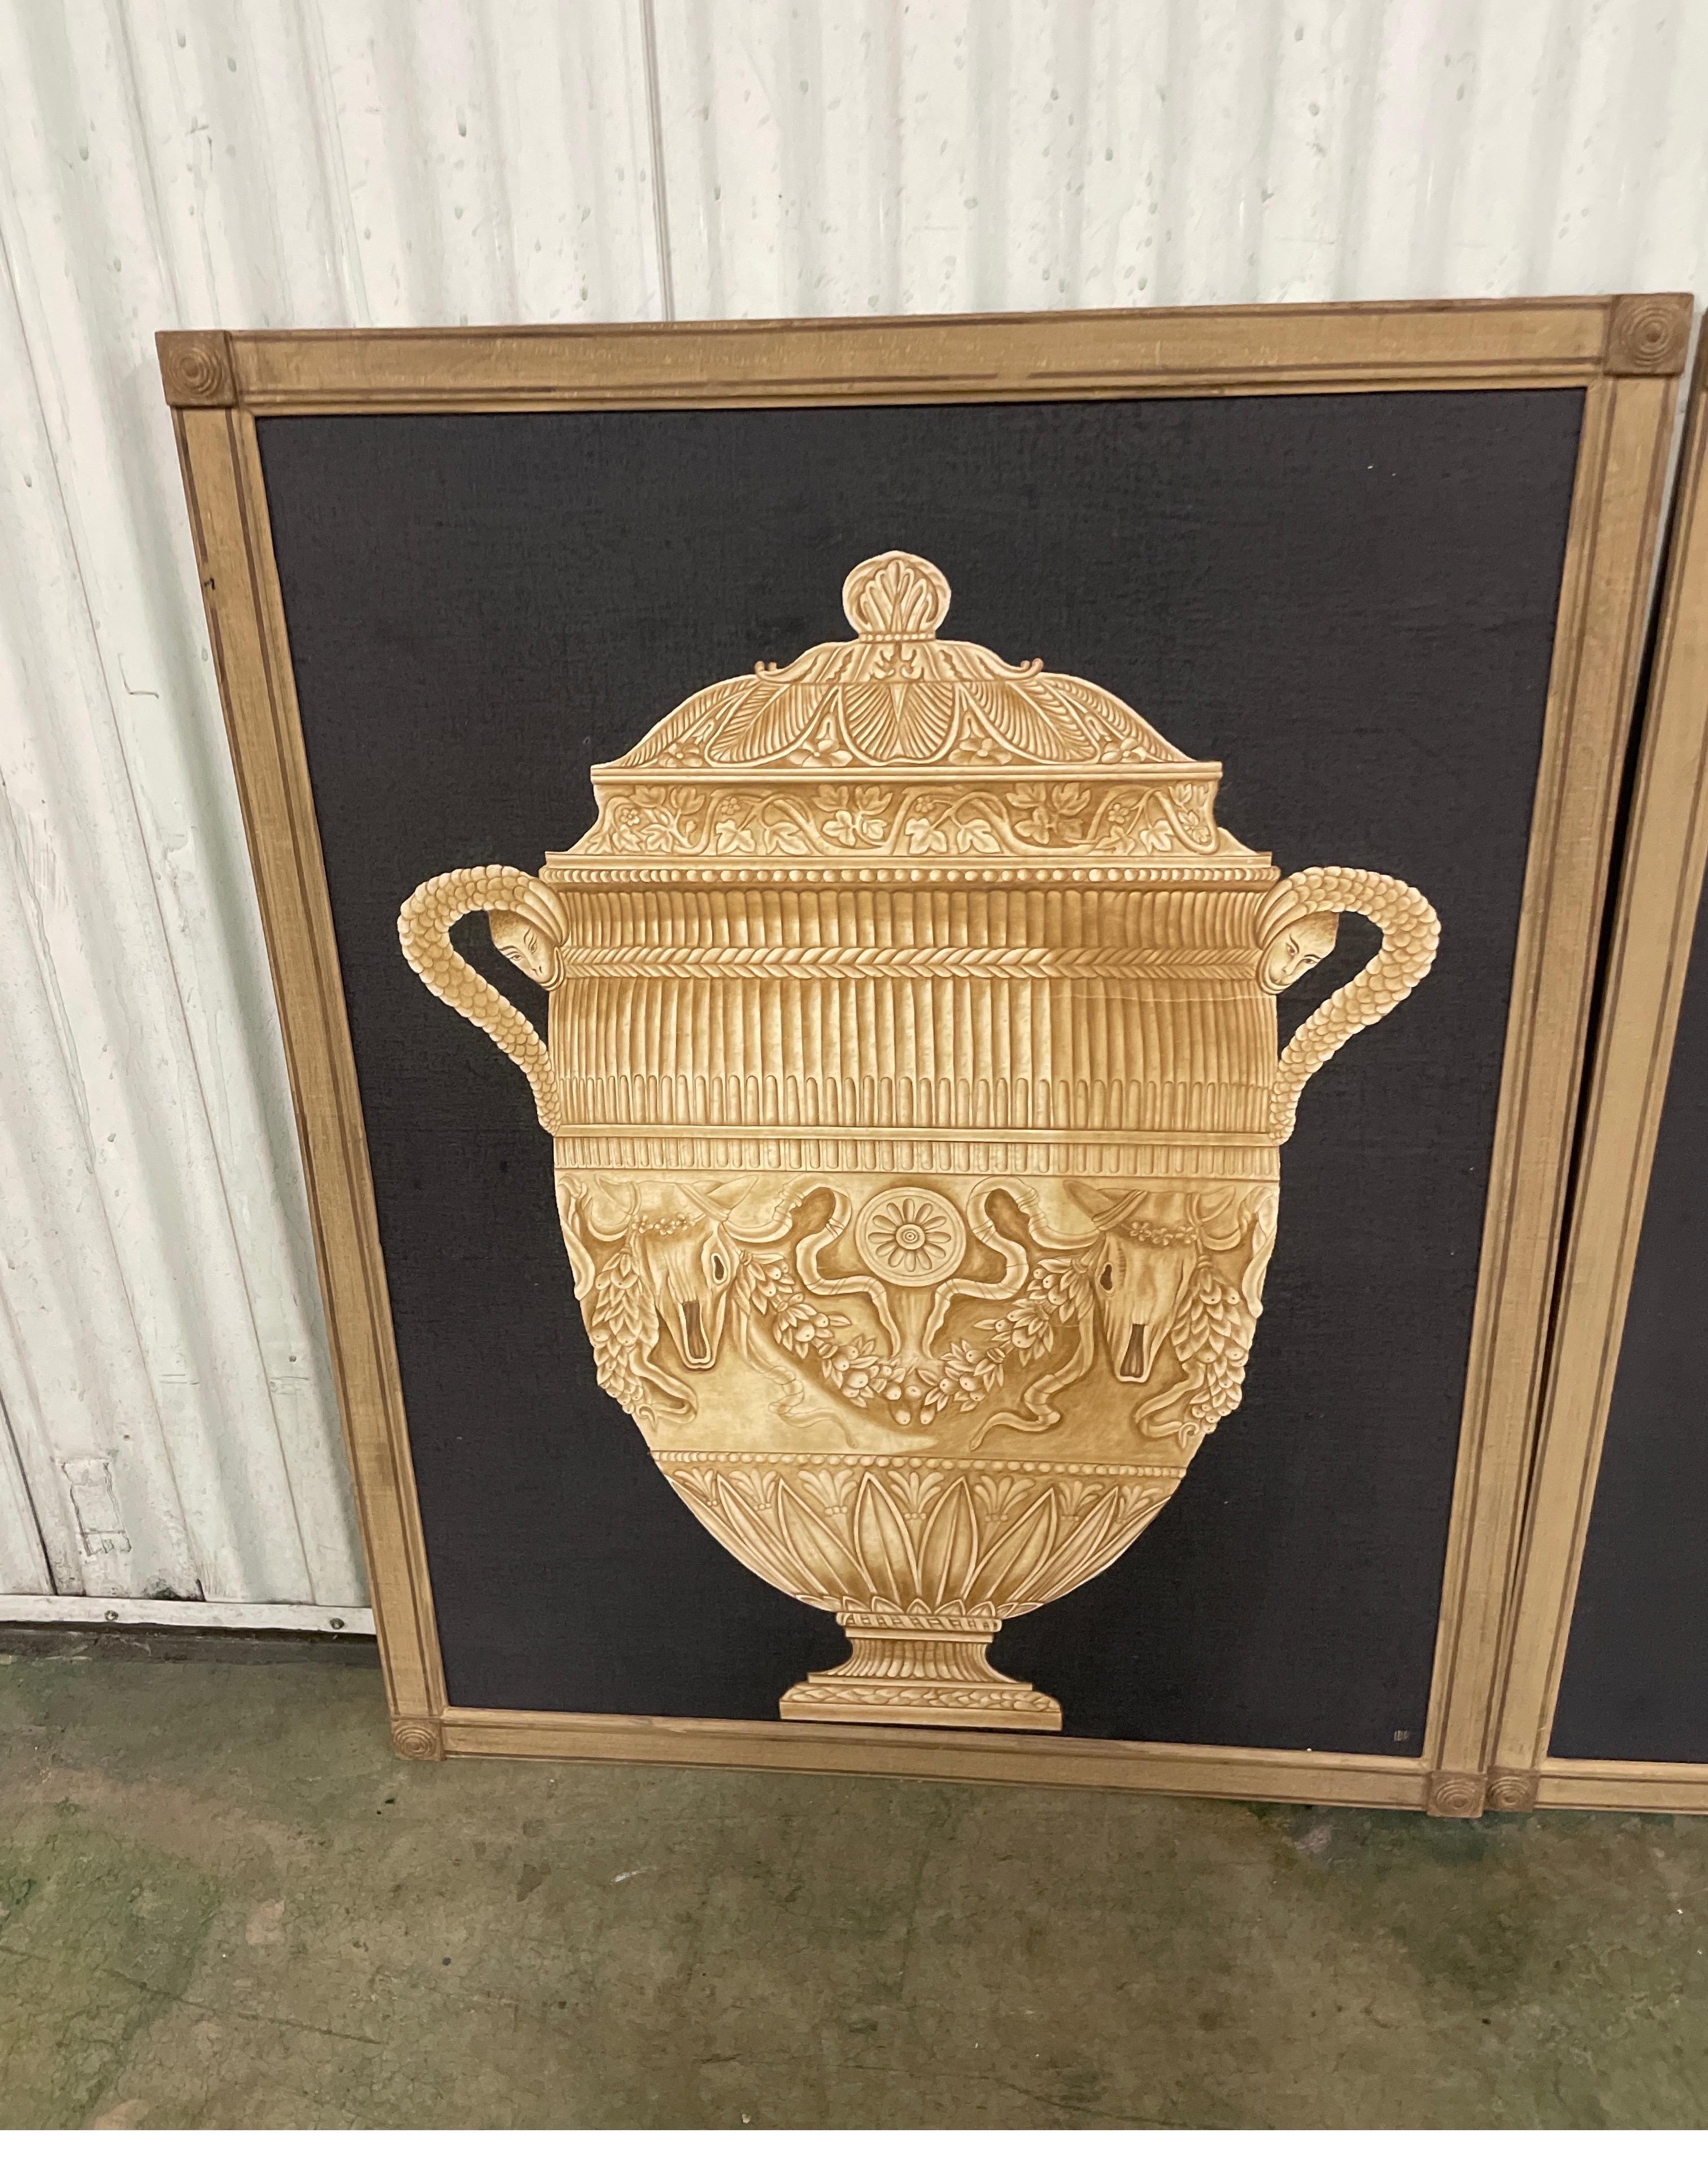 Set of four vintage neoclassical wood plaques of different, but complimentary urns. All done on a black background with natural stone colored urns. Elegant wood frame with small corner details.